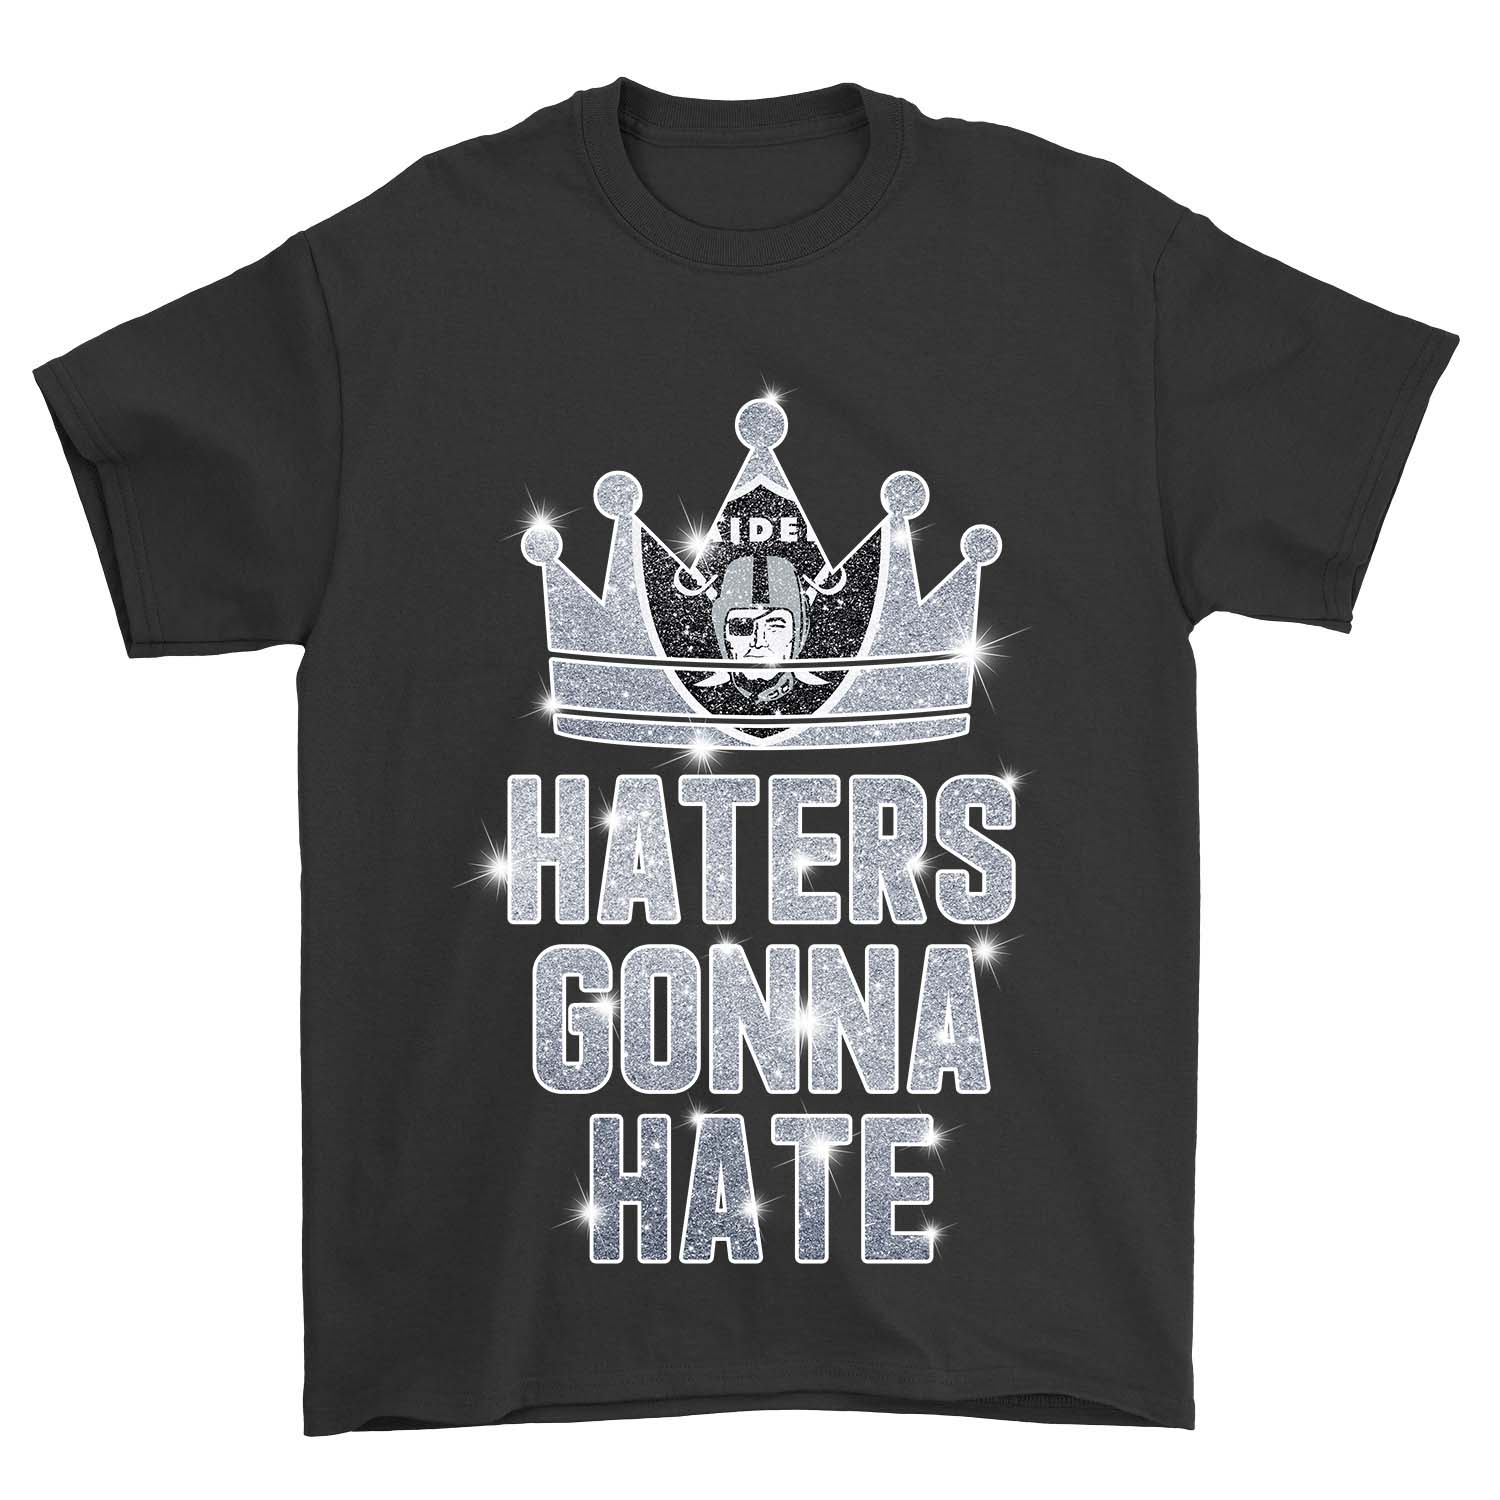 NFL Oakland Las Vergas Raiders Haters Gonna Hate Oakland Las Vergas Raiders Tank Top Shirt Tshirt For Fan